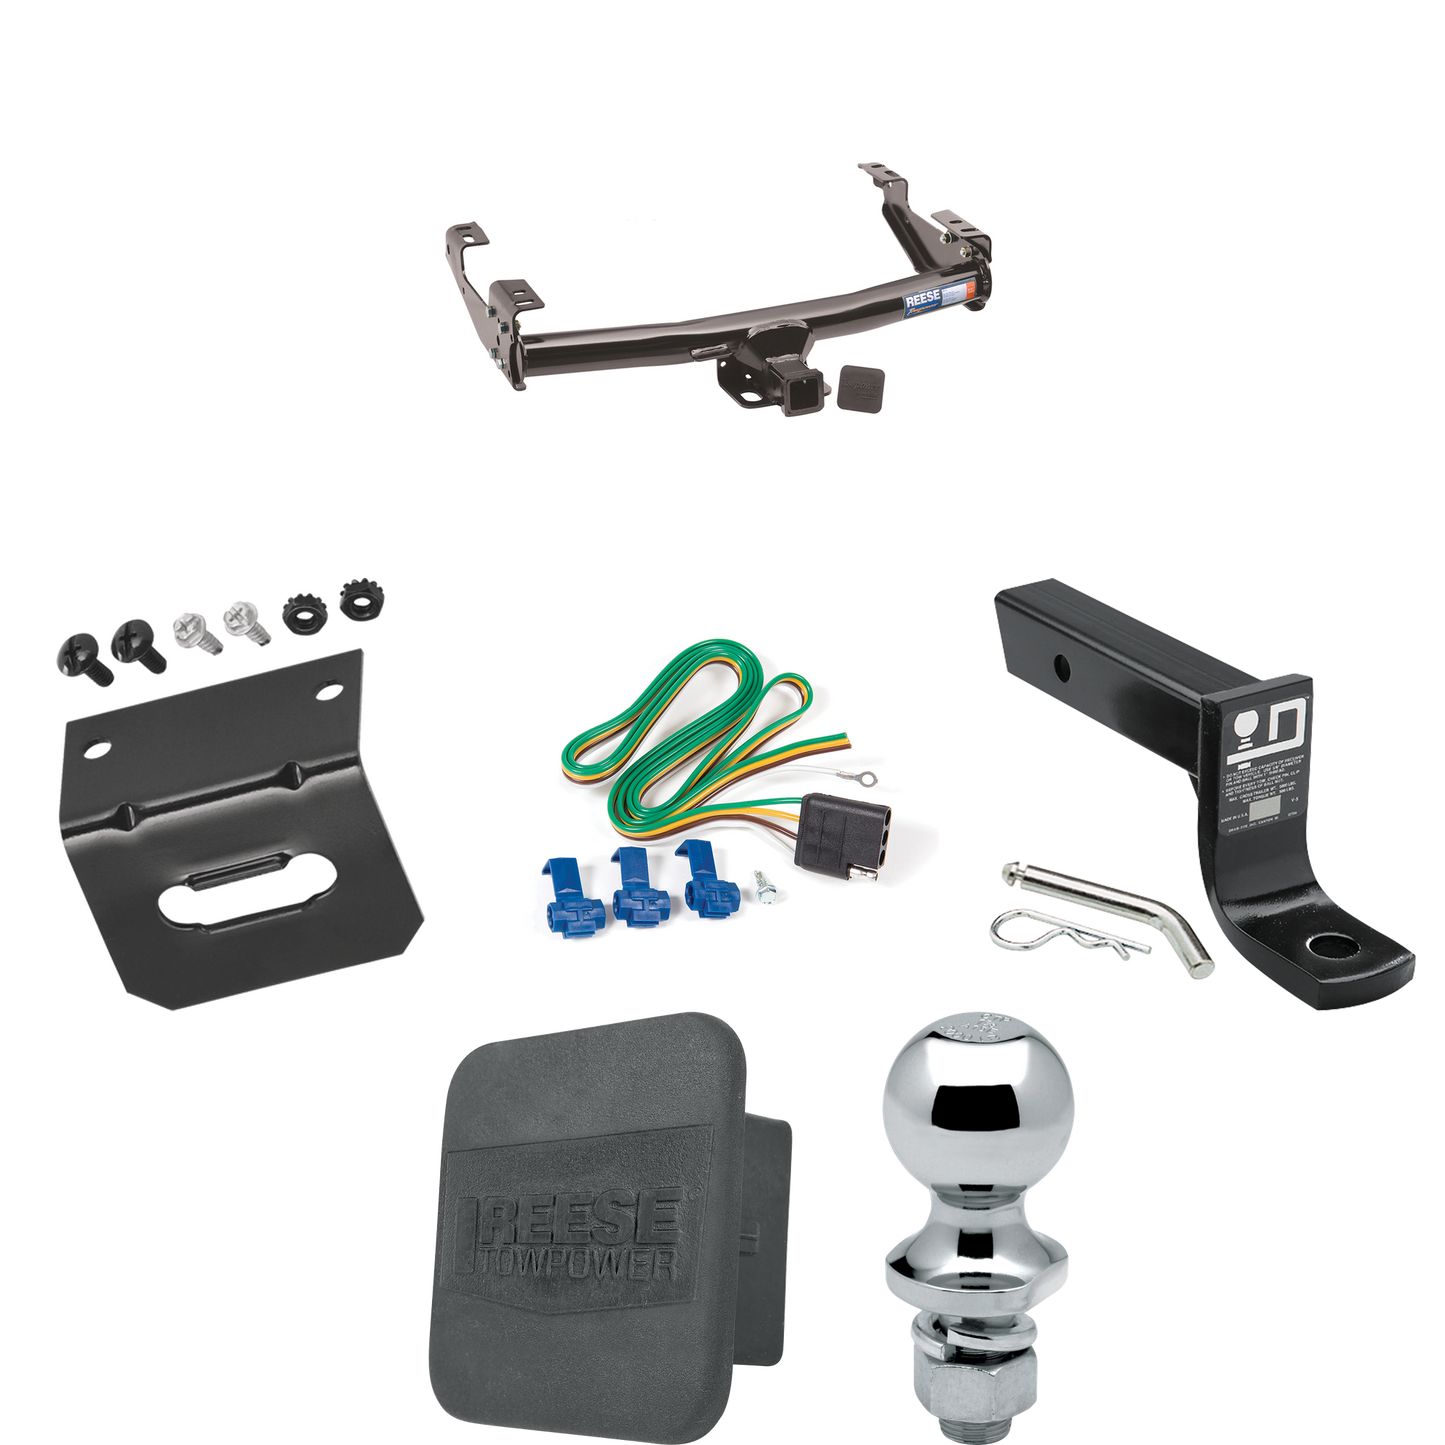 Fits 1975-1980 Dodge W200 Trailer Hitch Tow PKG w/ 4-Flat Wiring + Ball Mount w/ 4" Drop + 1-7/8" Ball + Wiring Bracket + Hitch Cover By Reese Towpower